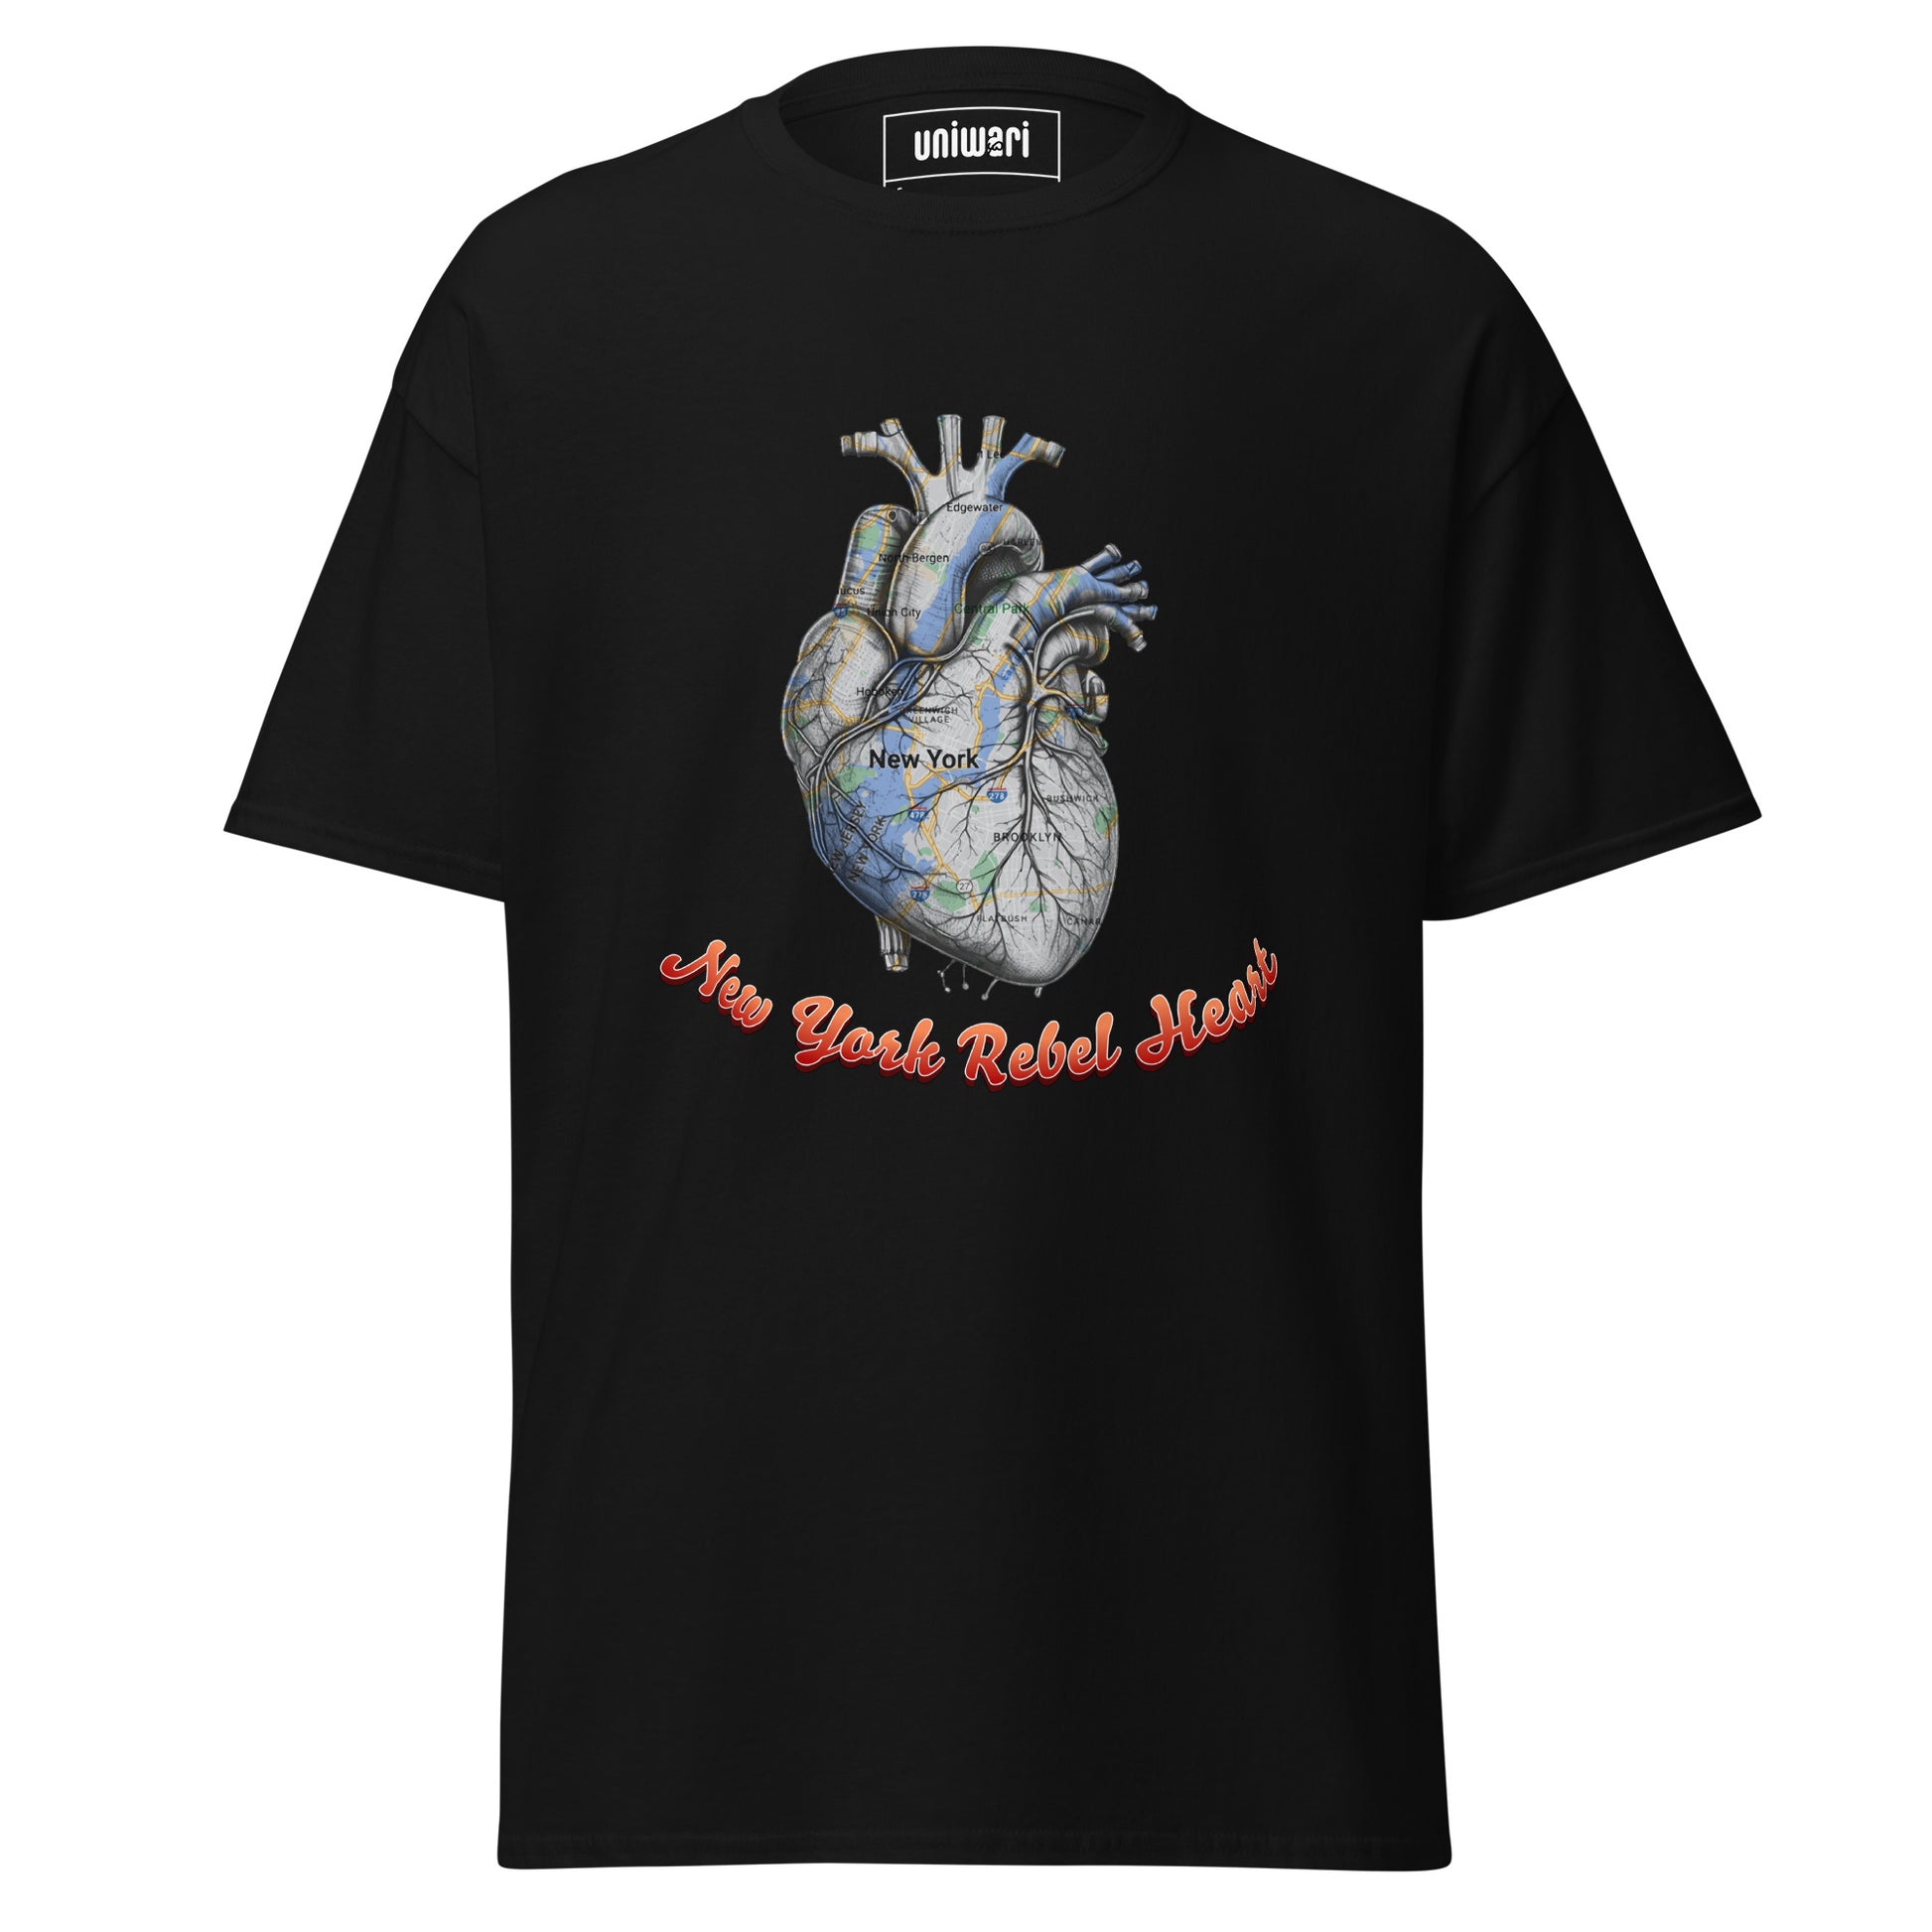 Black High Quality Tee - Front Design with a Heart Shaped Map of New York and a Phrase "New York Rebel Heart" print